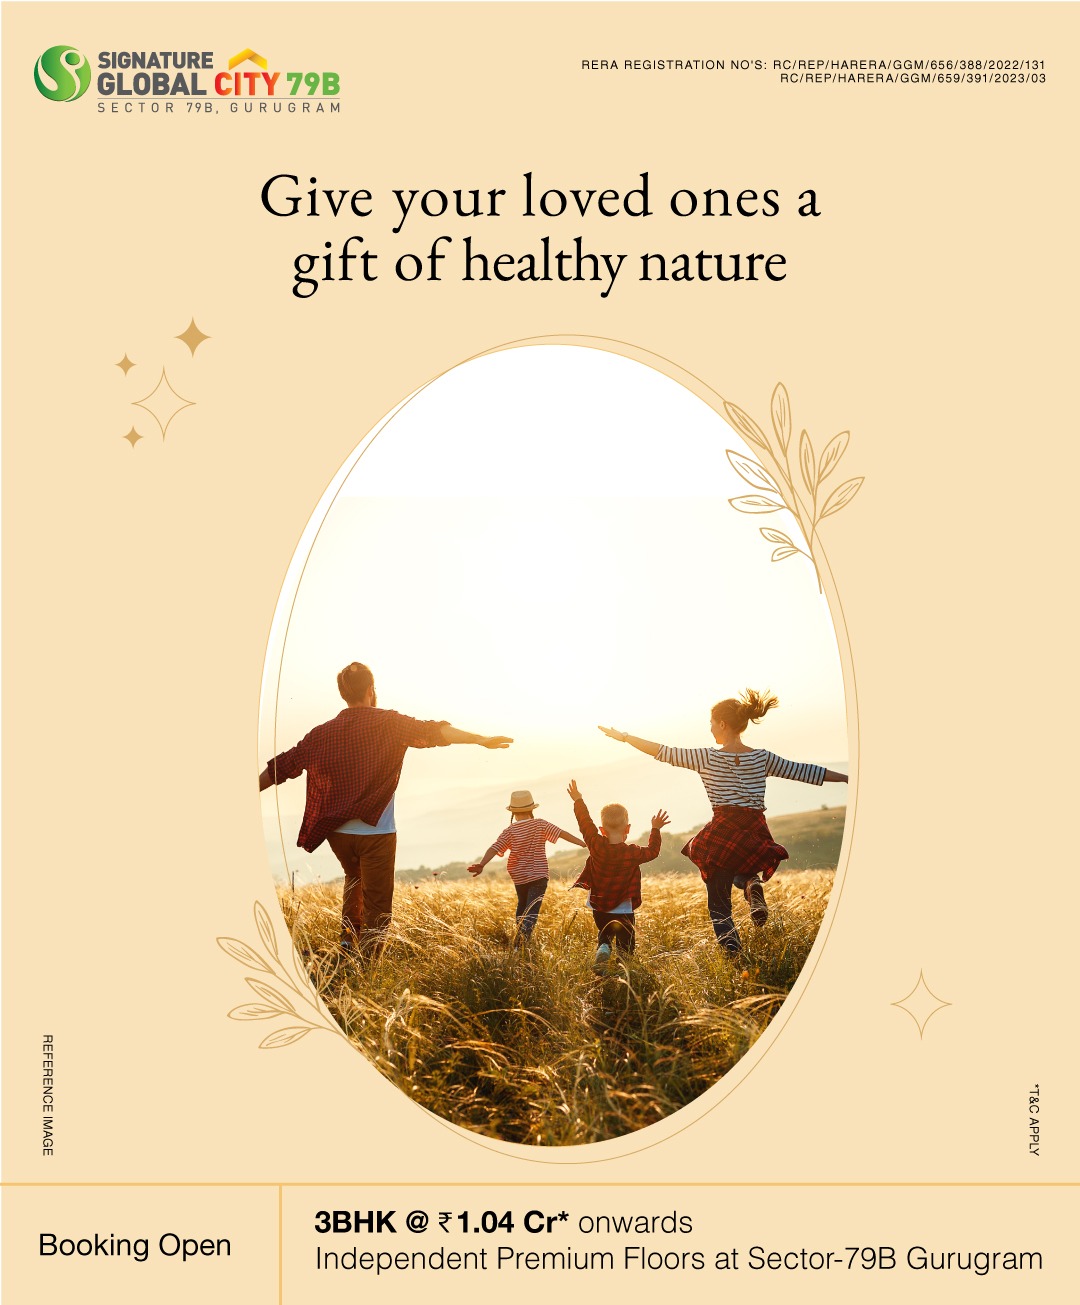 Gift your loved ones a healthy life in a dreamy habitat at Signature Global City 79B, Sector 79B, Gurgaon